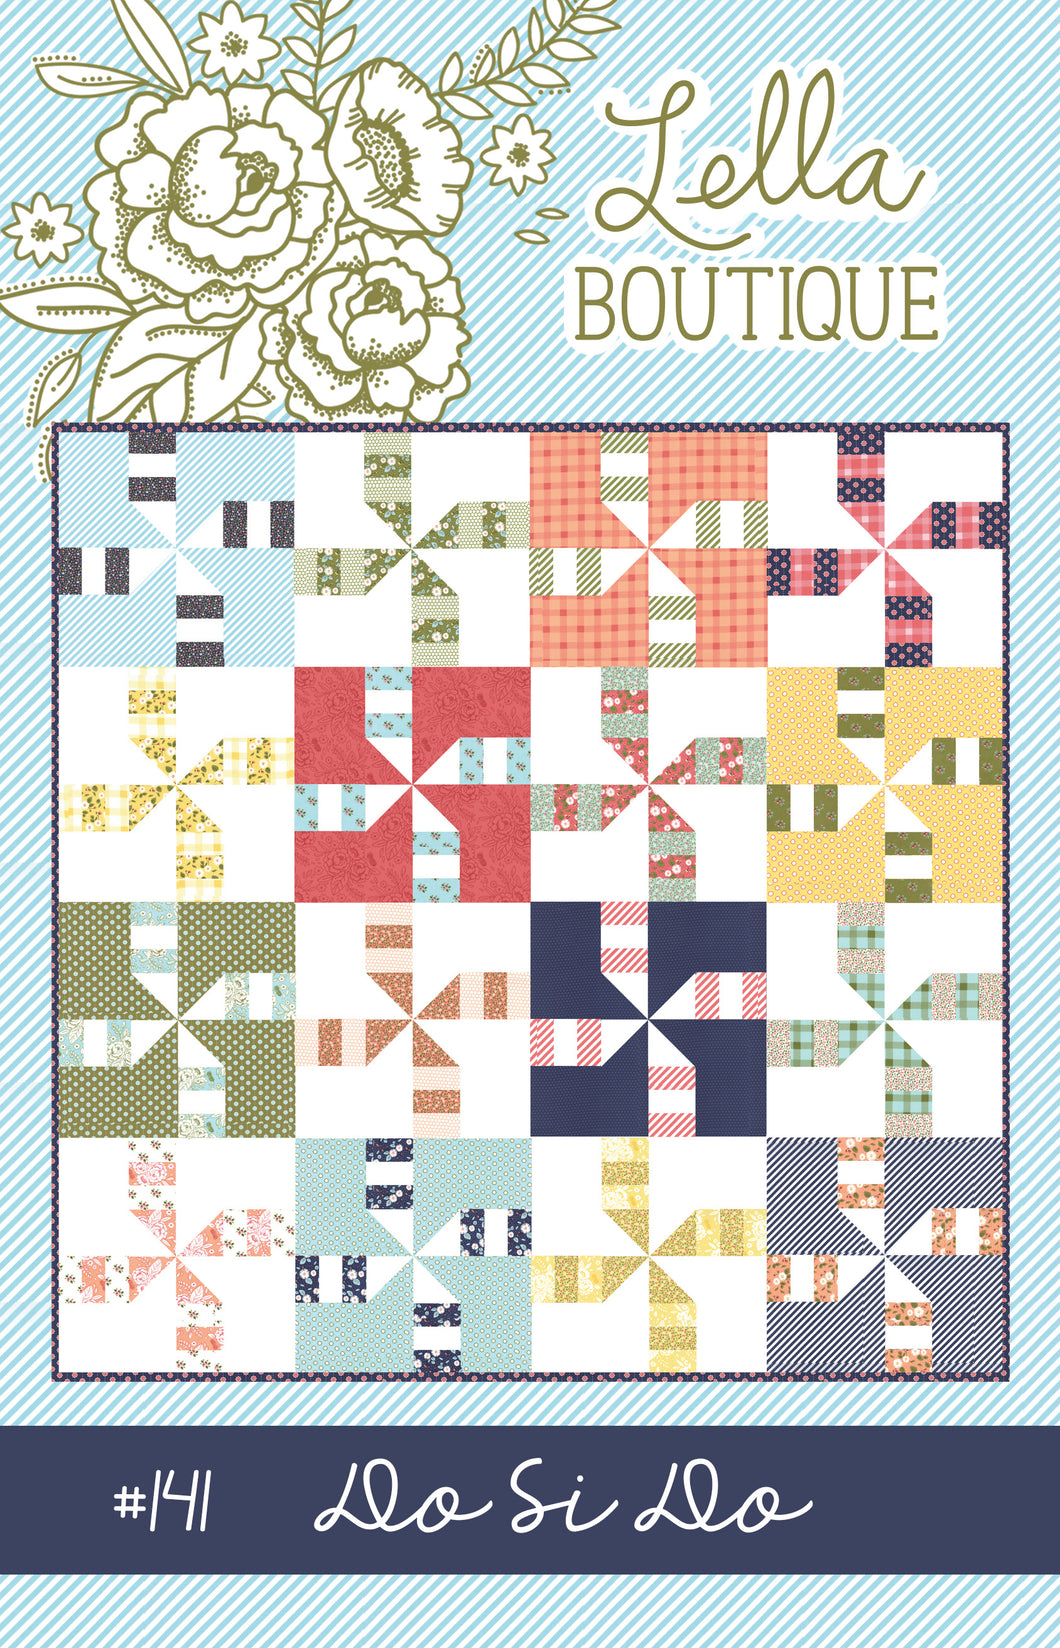 Do Si Do pinwheel quilt by Lella Boutique. Fabric is Little Miss Sunshine by Lella Boutique for Moda Fabrics.